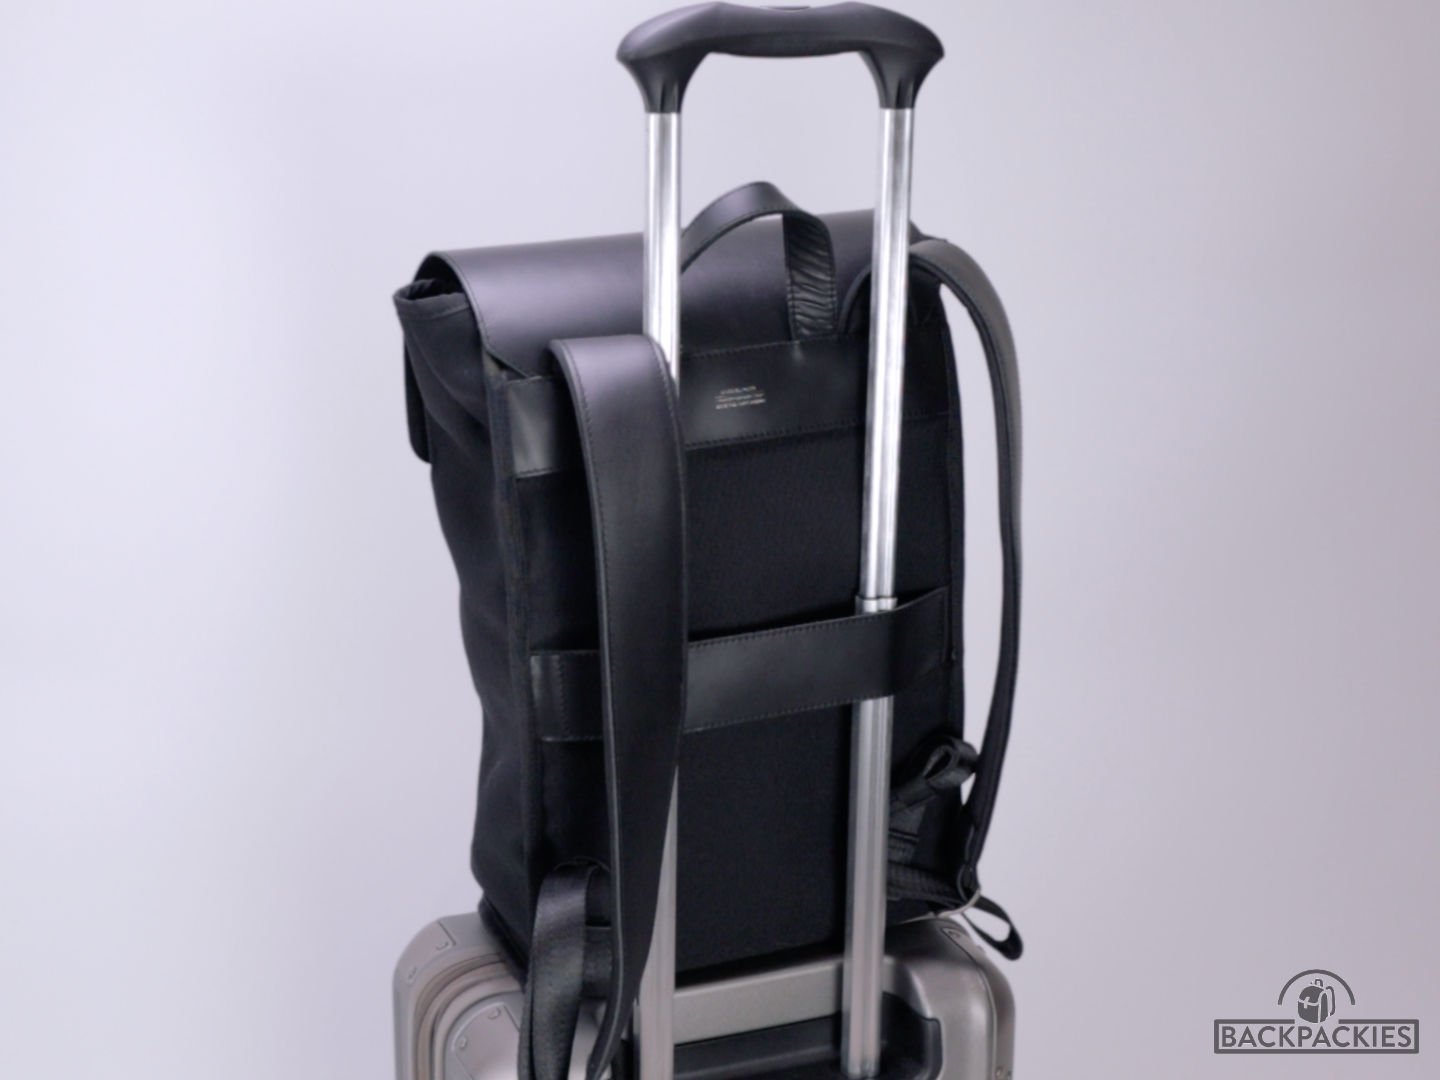 Harber London Commuter backpack review - trolley sleeve